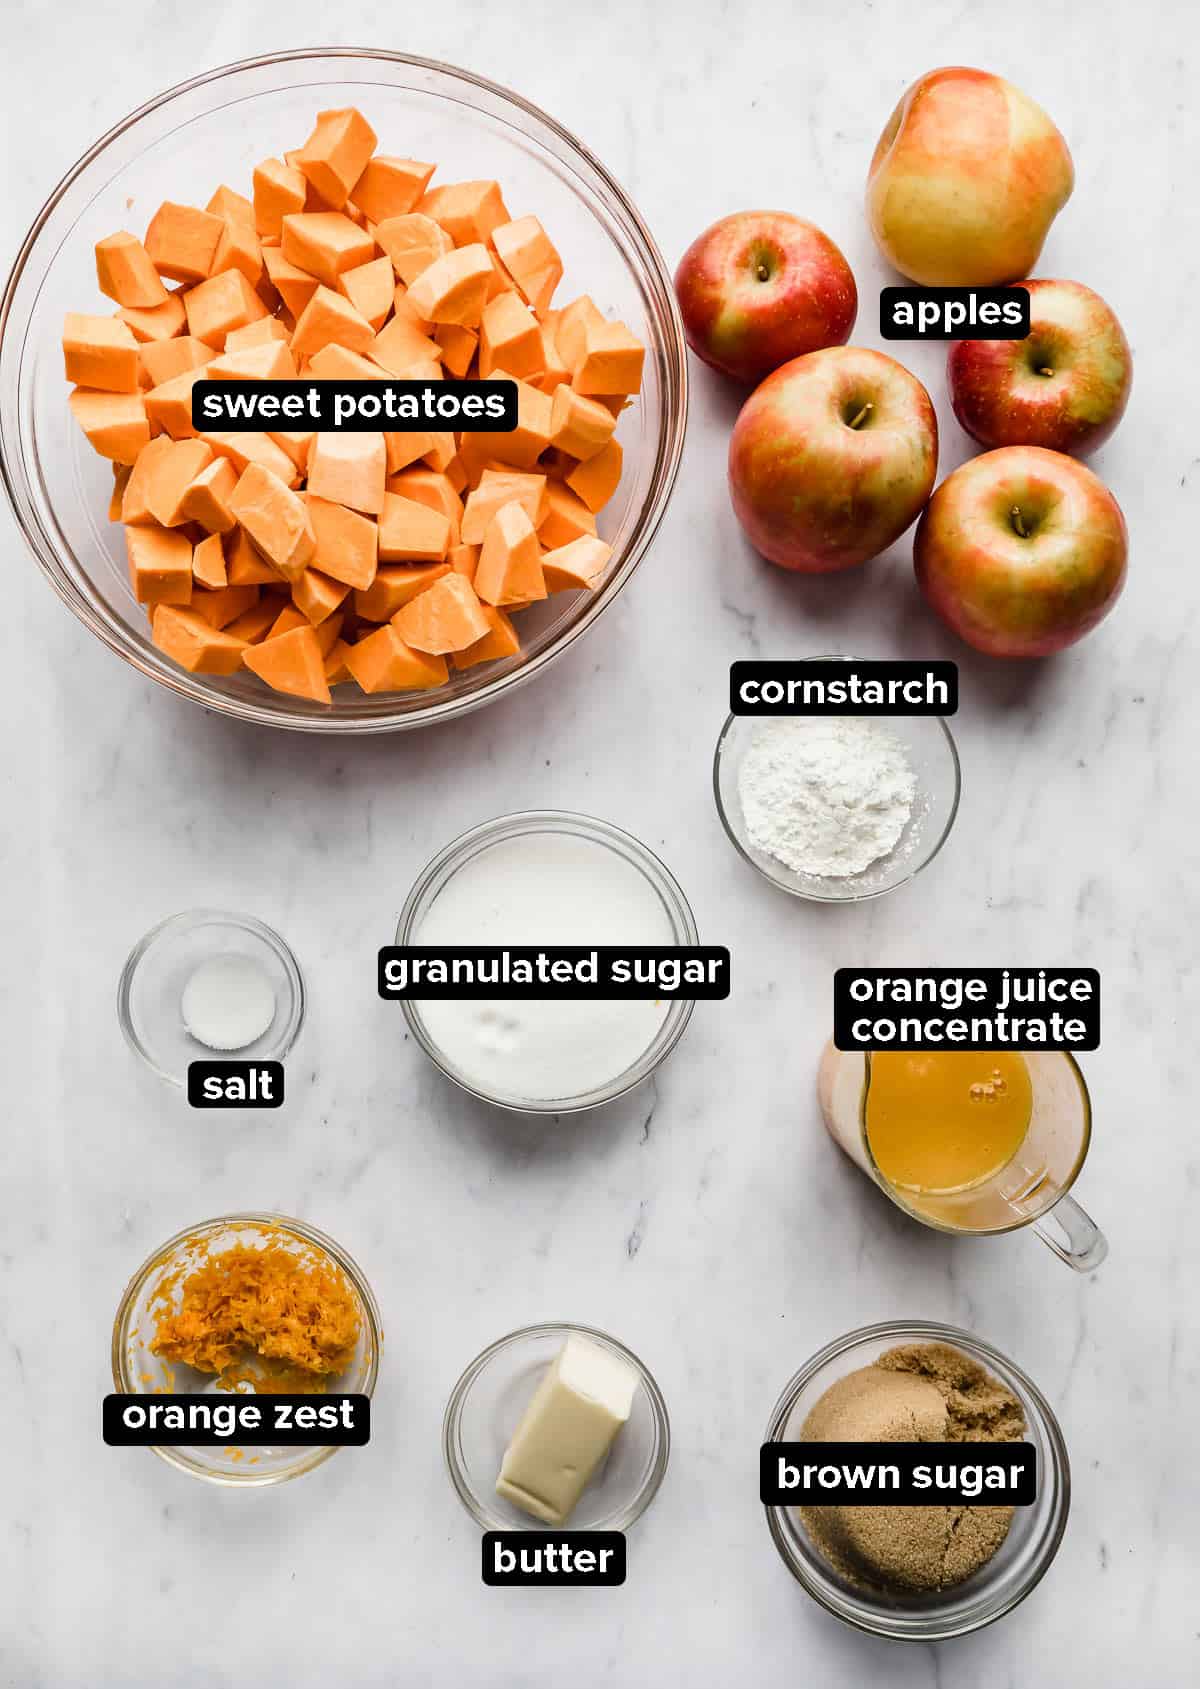 Candied yams ingredients in glass bowls, on a marble background.